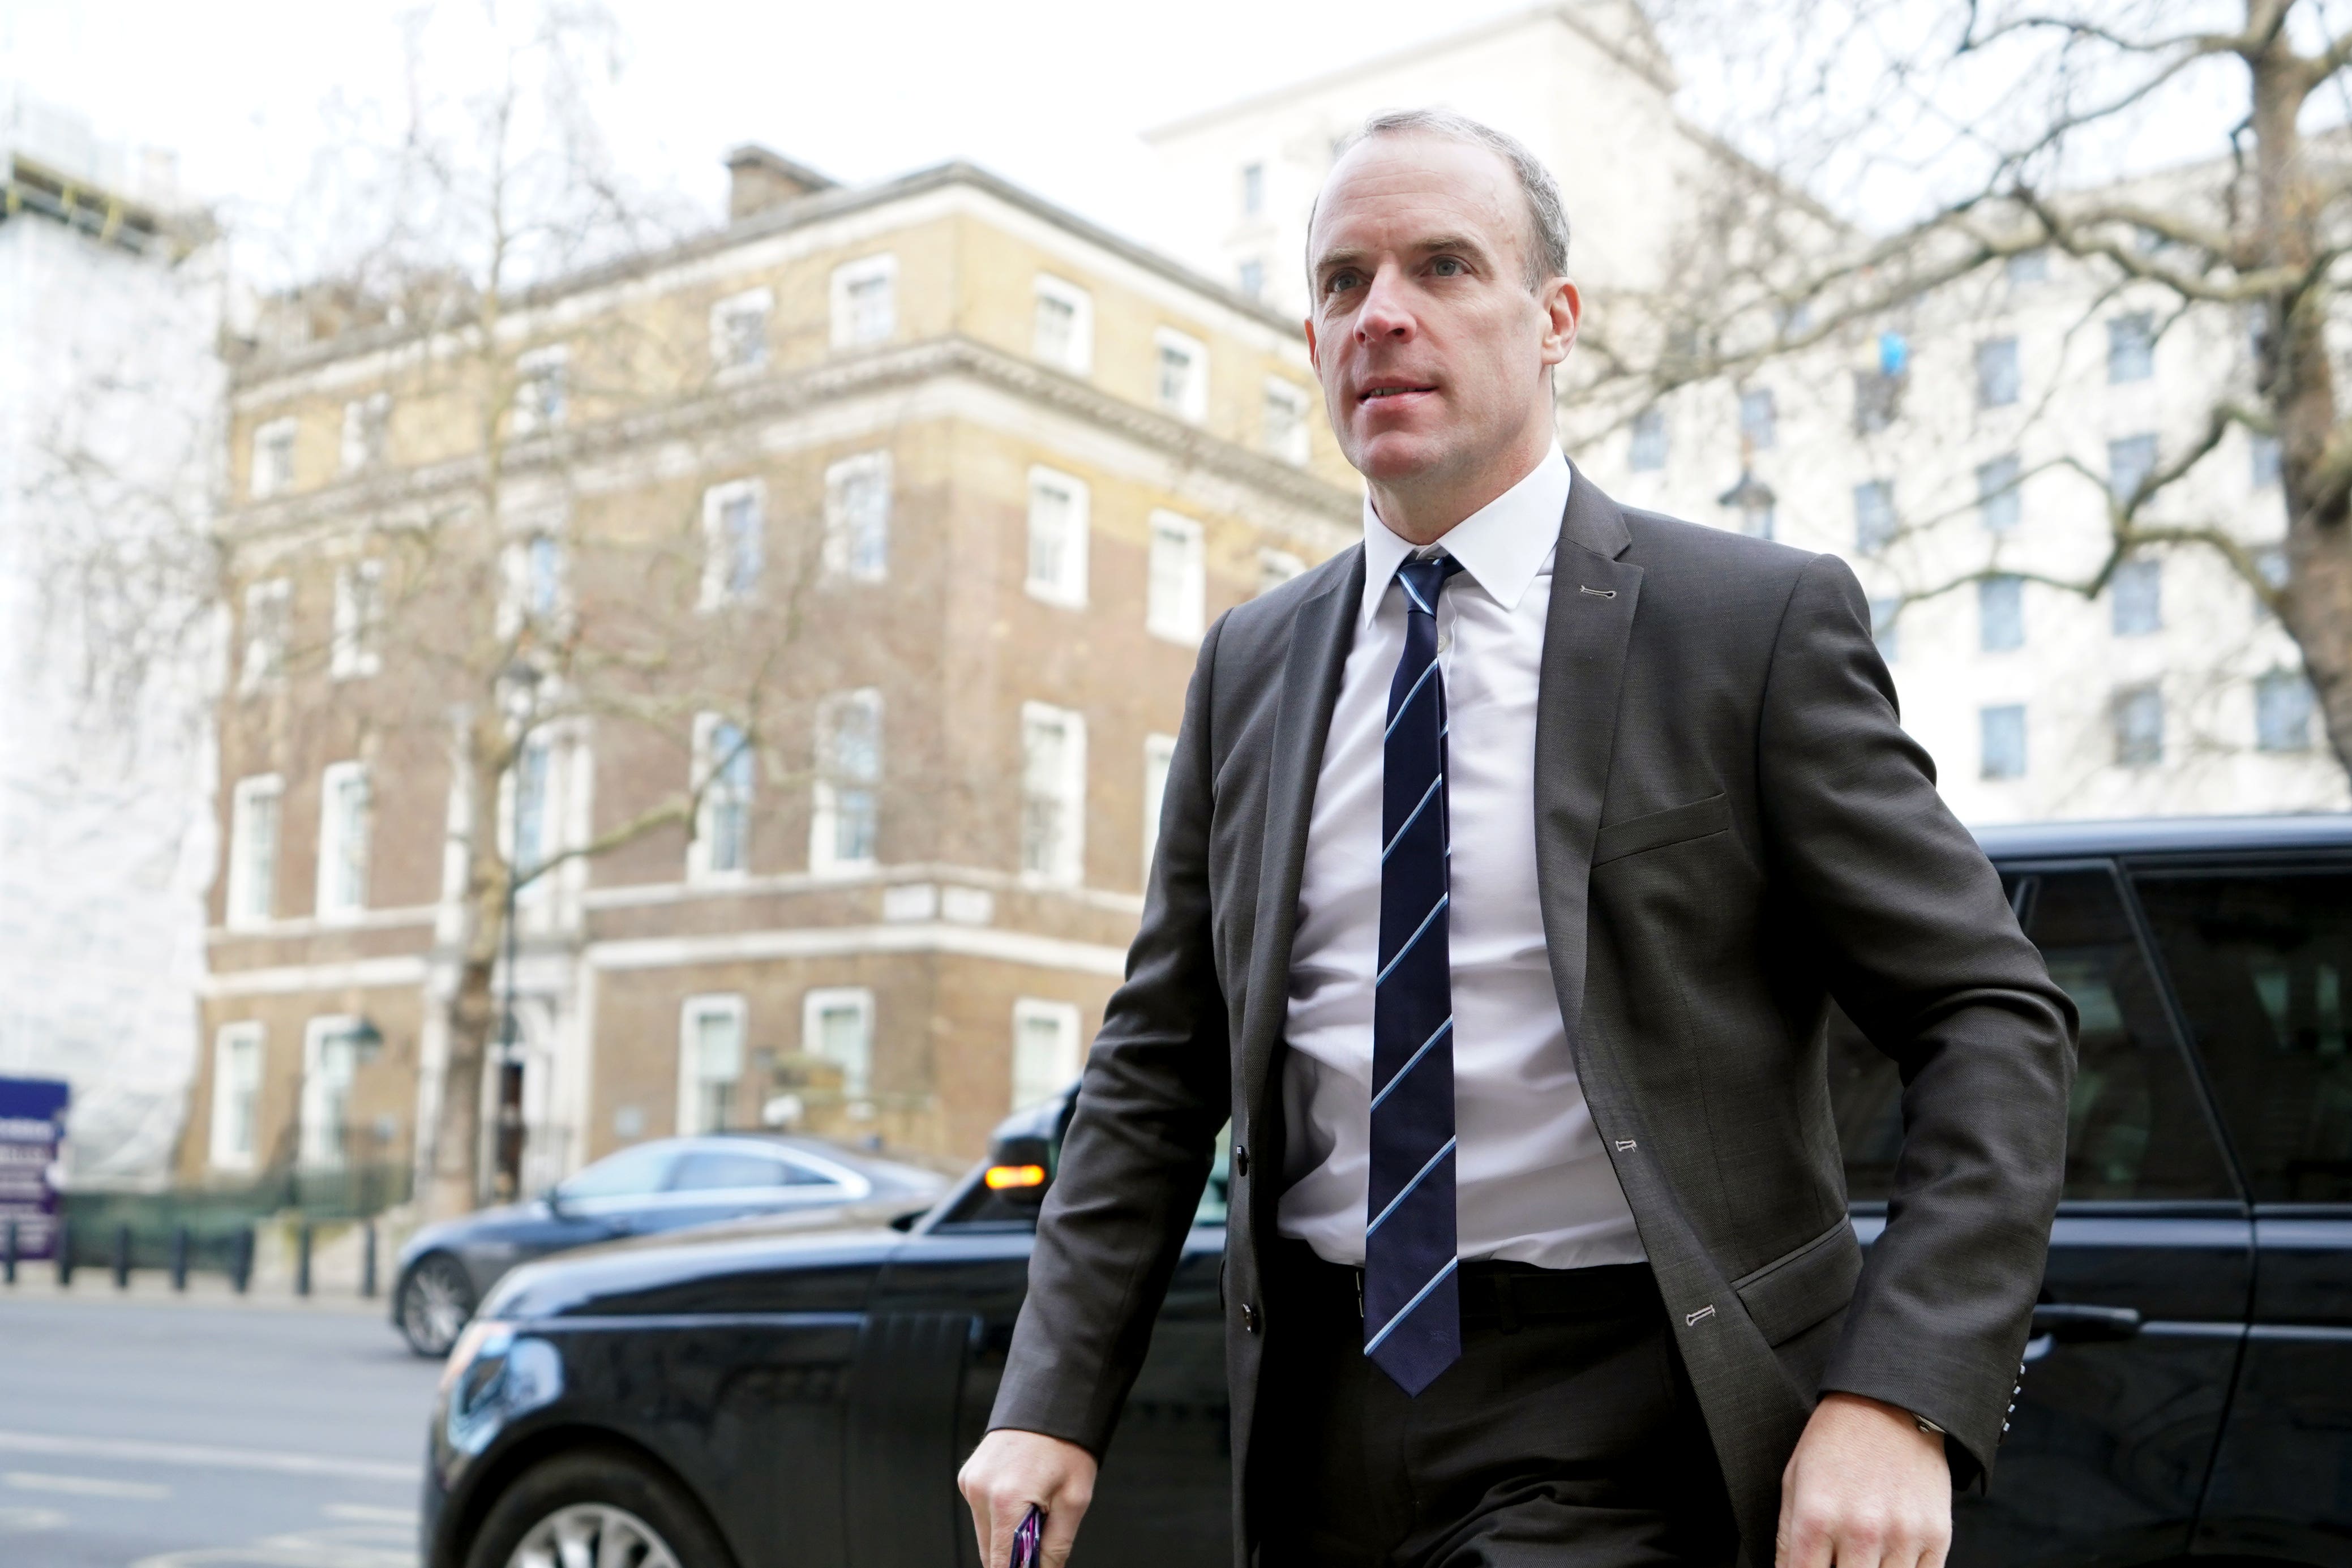 Deputy prime minister Dominic Raab has denied allegations of bullying